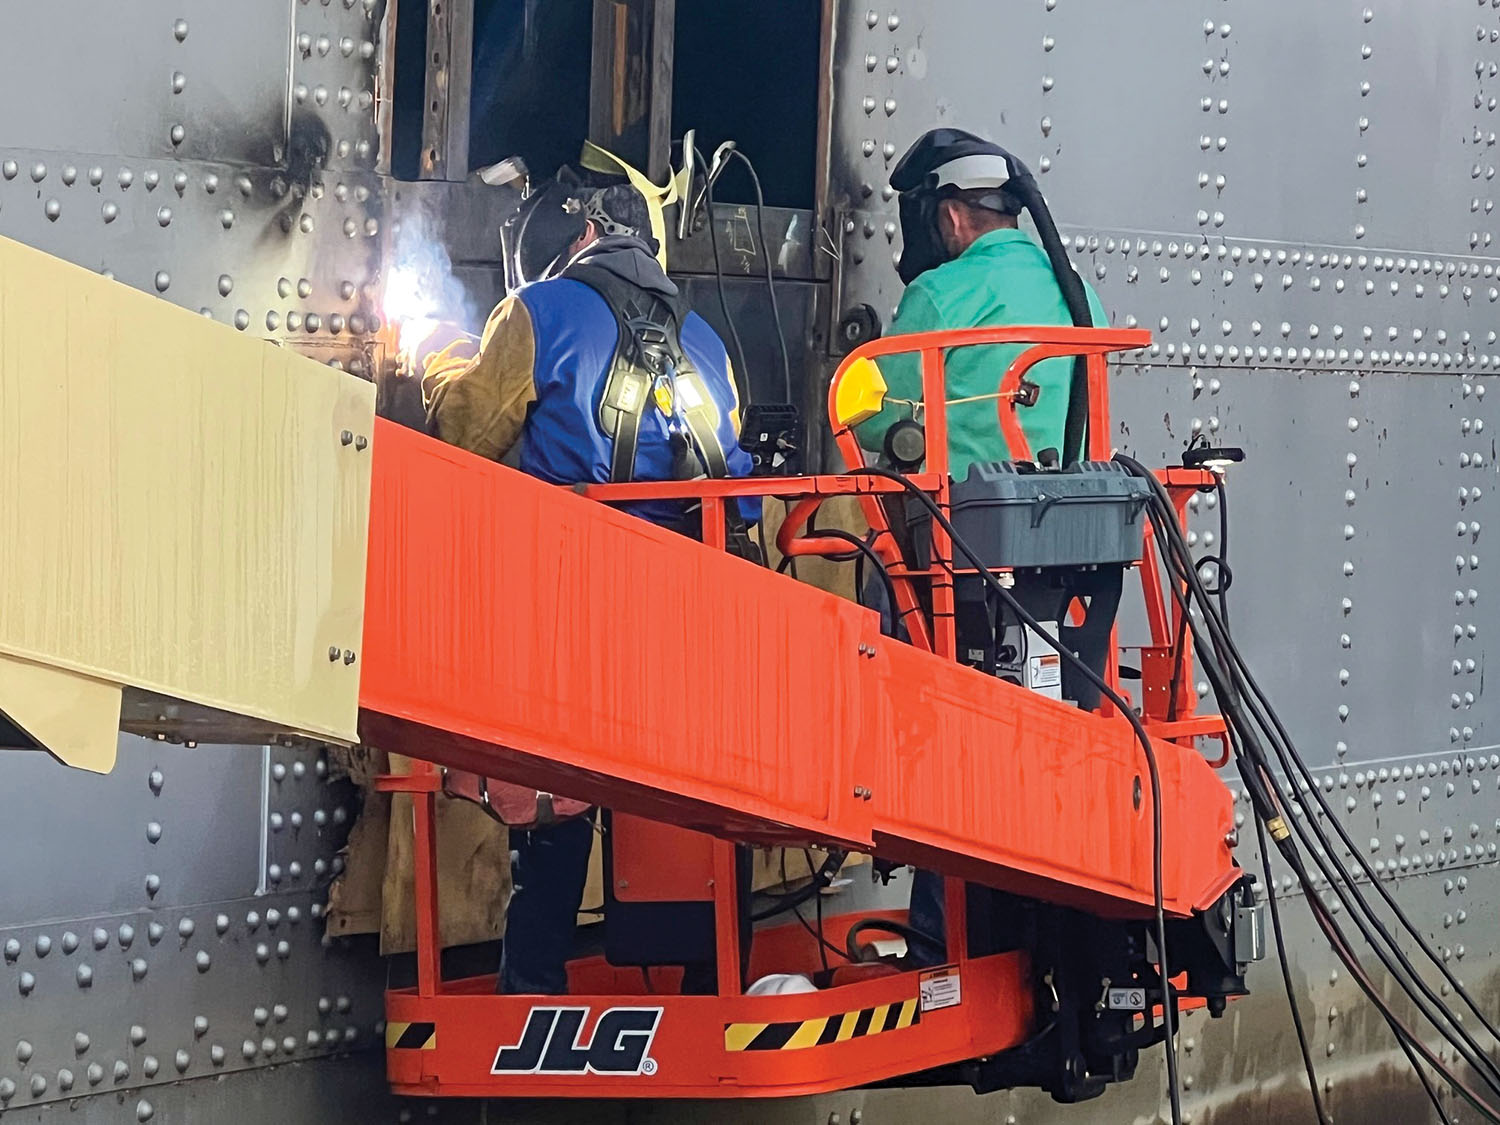 A crew makes repairs on one of the damaged upper miter gates at Kentucky Lock late last year. A second closure is scheduled to repair the other gate January 31-February 24. (Photo courtesy of Nashville Engineer District)